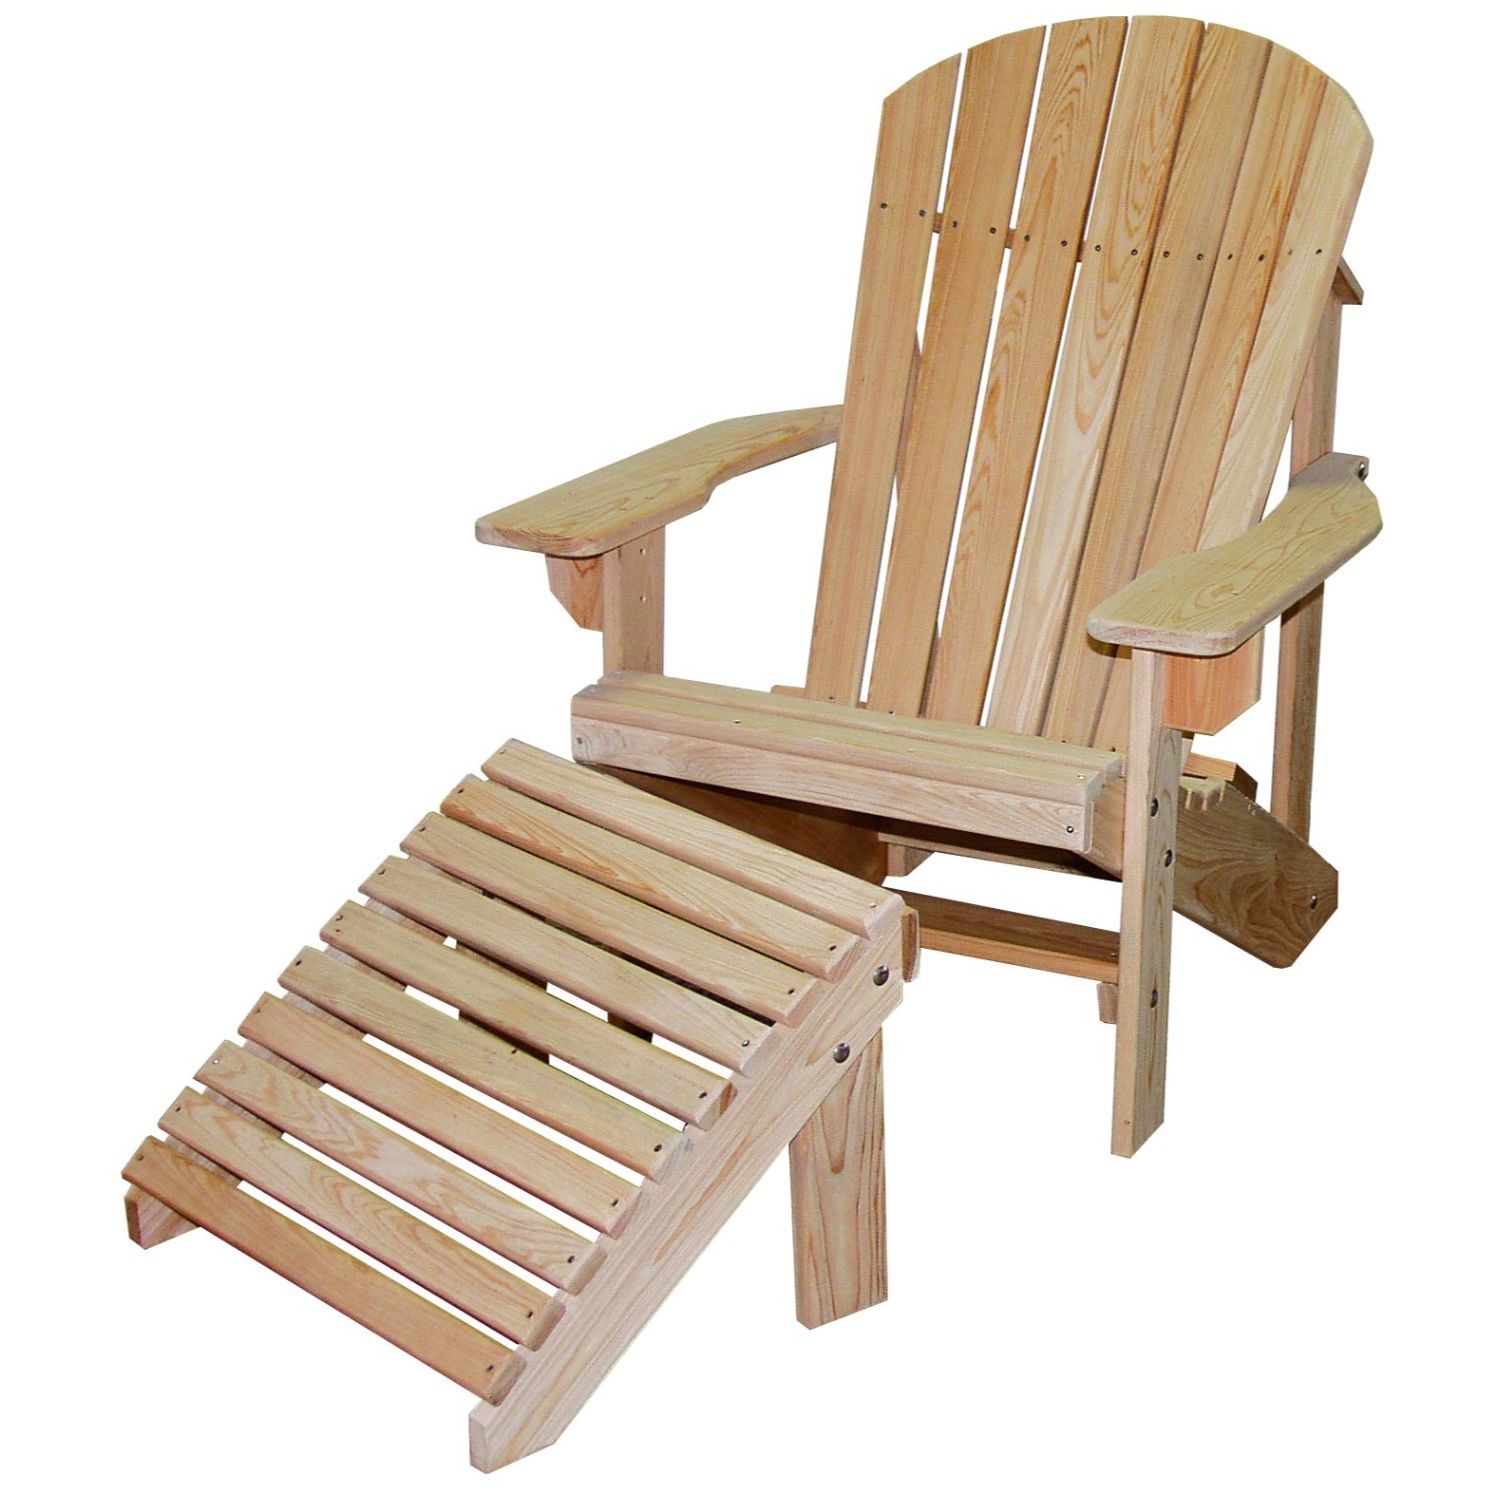 Unfinished Pressure Treated Pine Adirondack Chair with Footrest